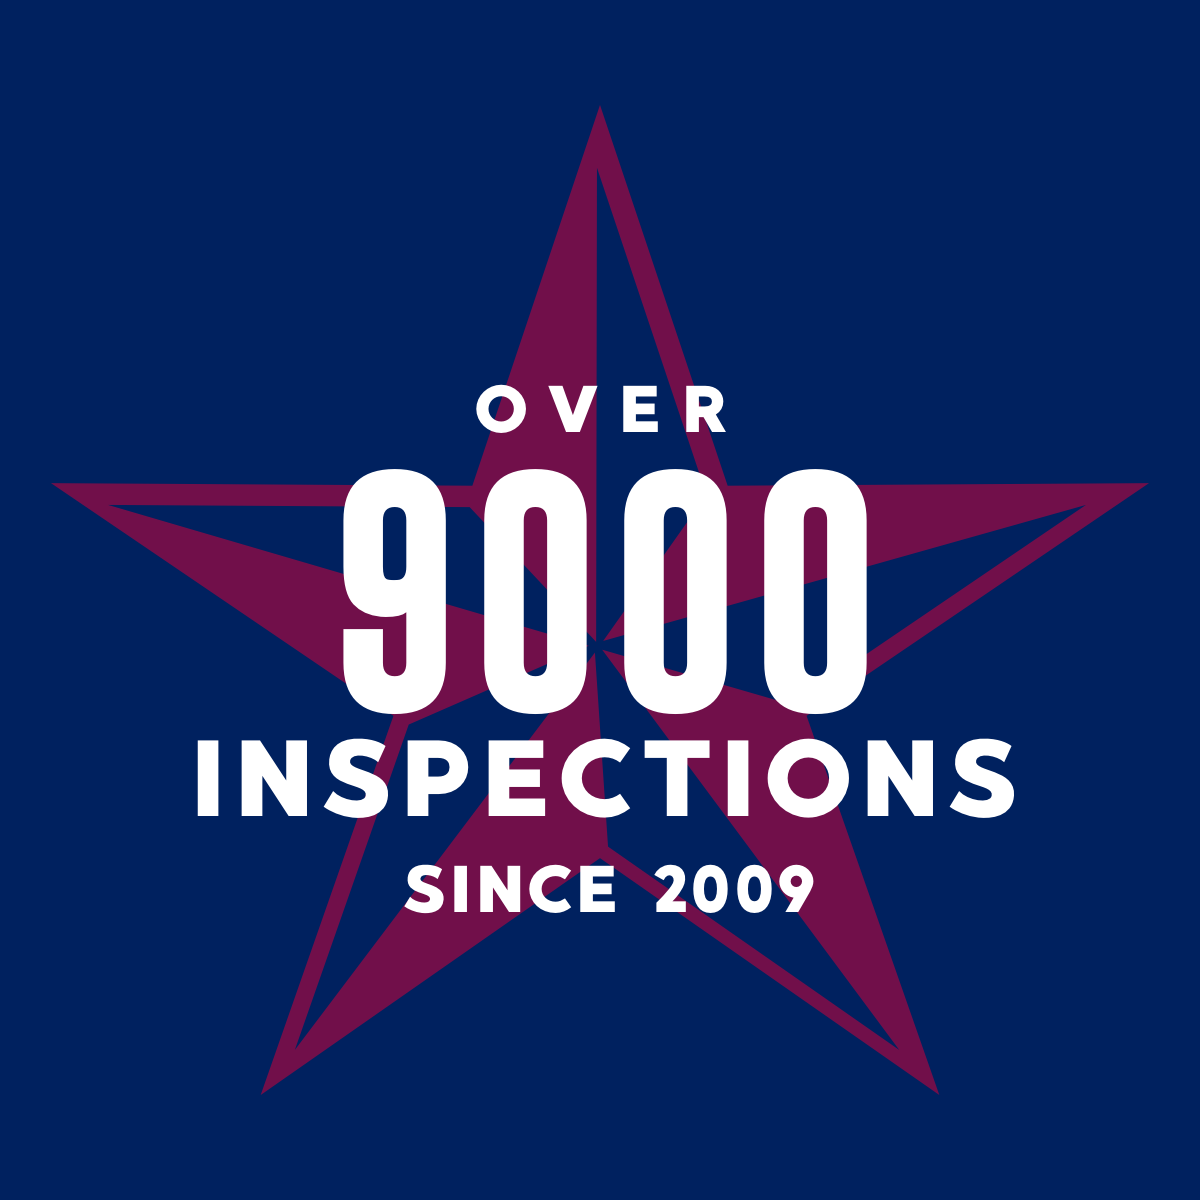 Certified Home Inspections since 2009